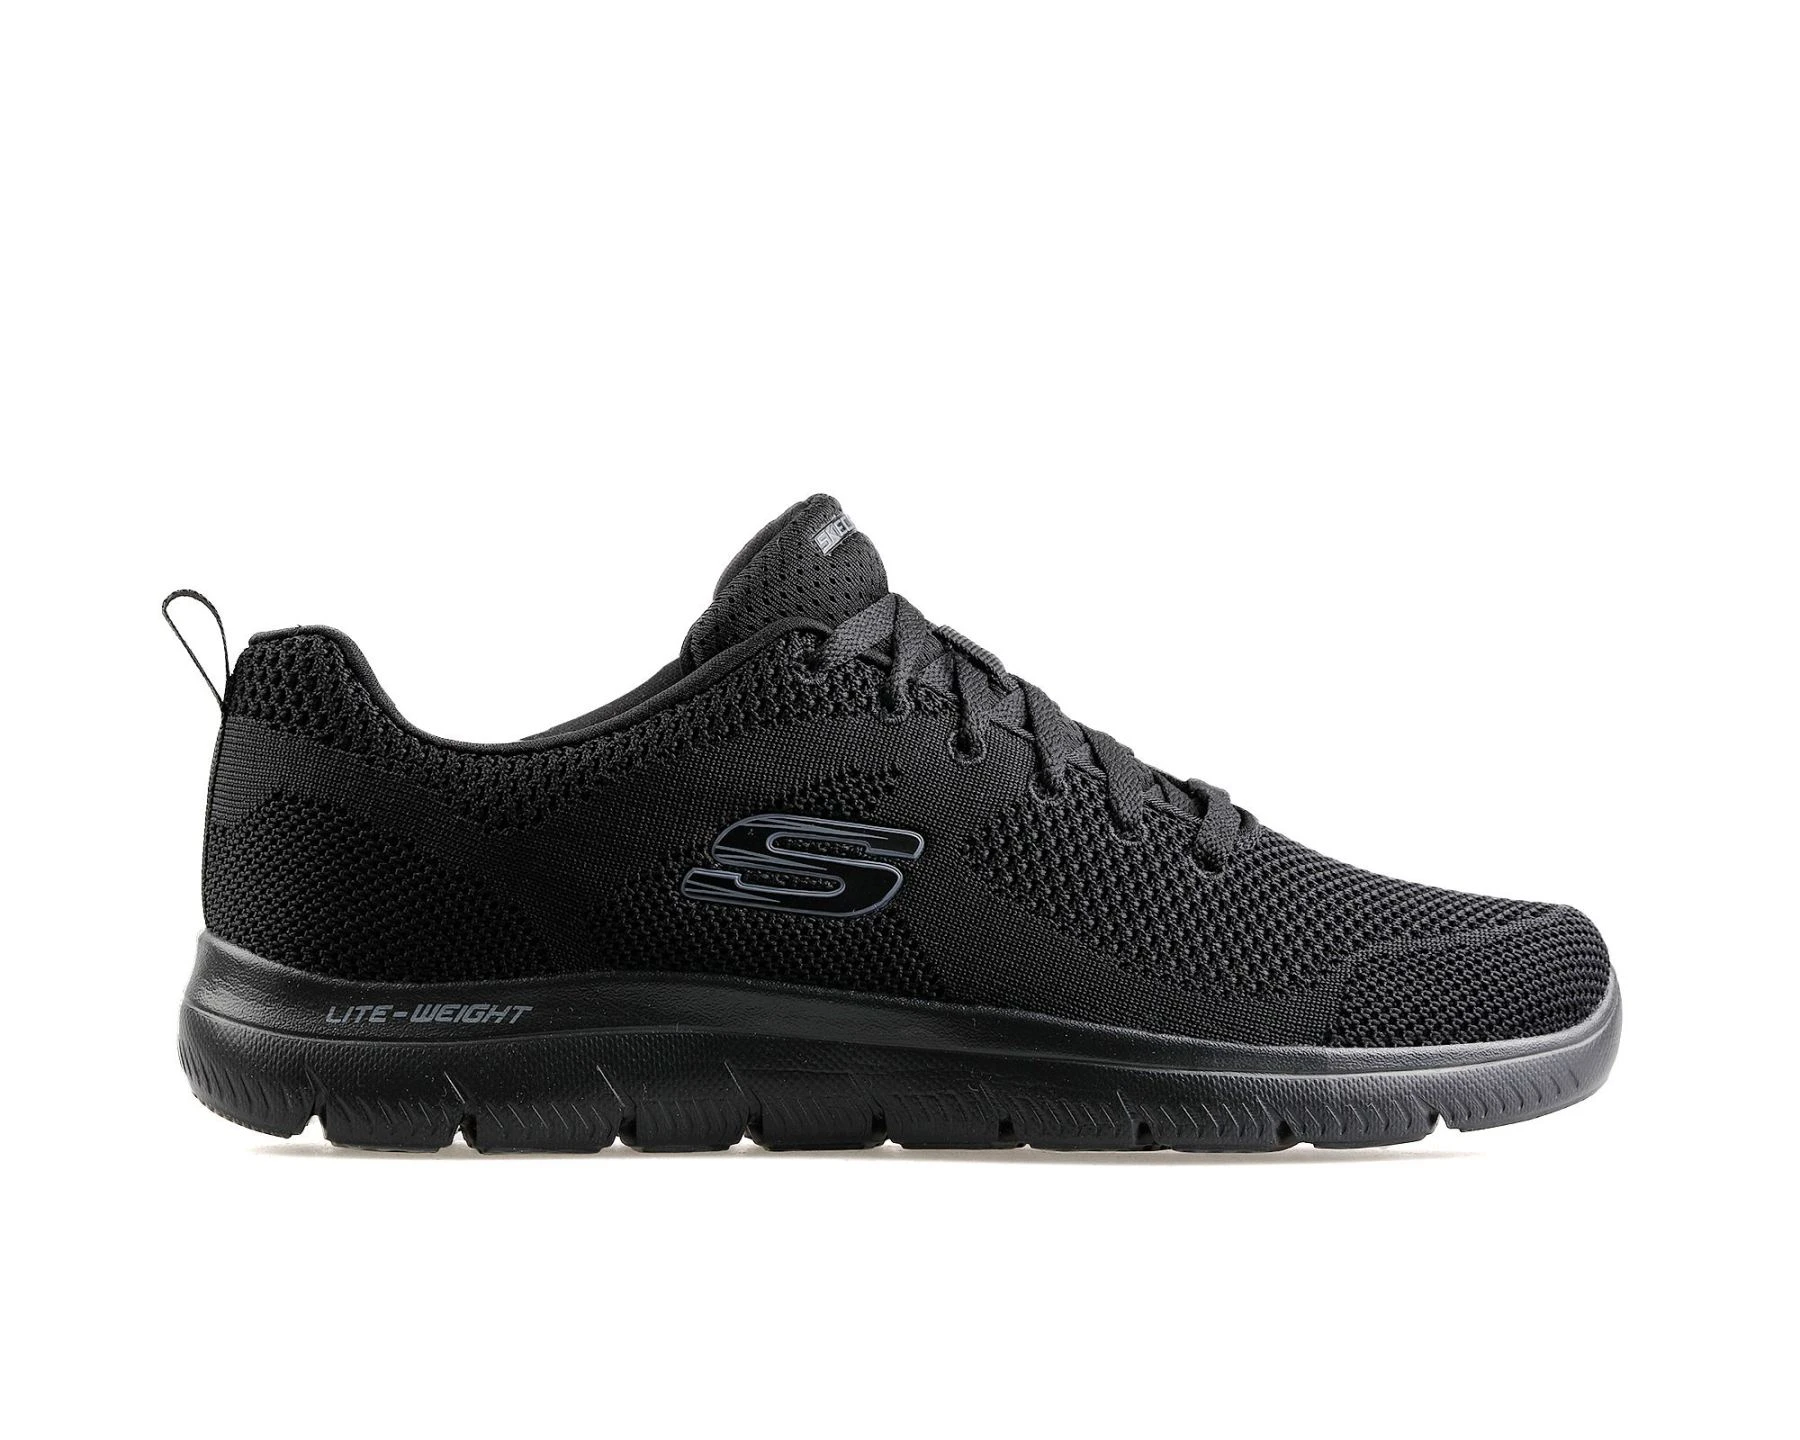 Skechers Summit Shoes Mens Sneakers Fashion Lace Up Casual Shoes men's  Flats Soft Sole Black Mens Shoes for Hiking| | - AliExpress